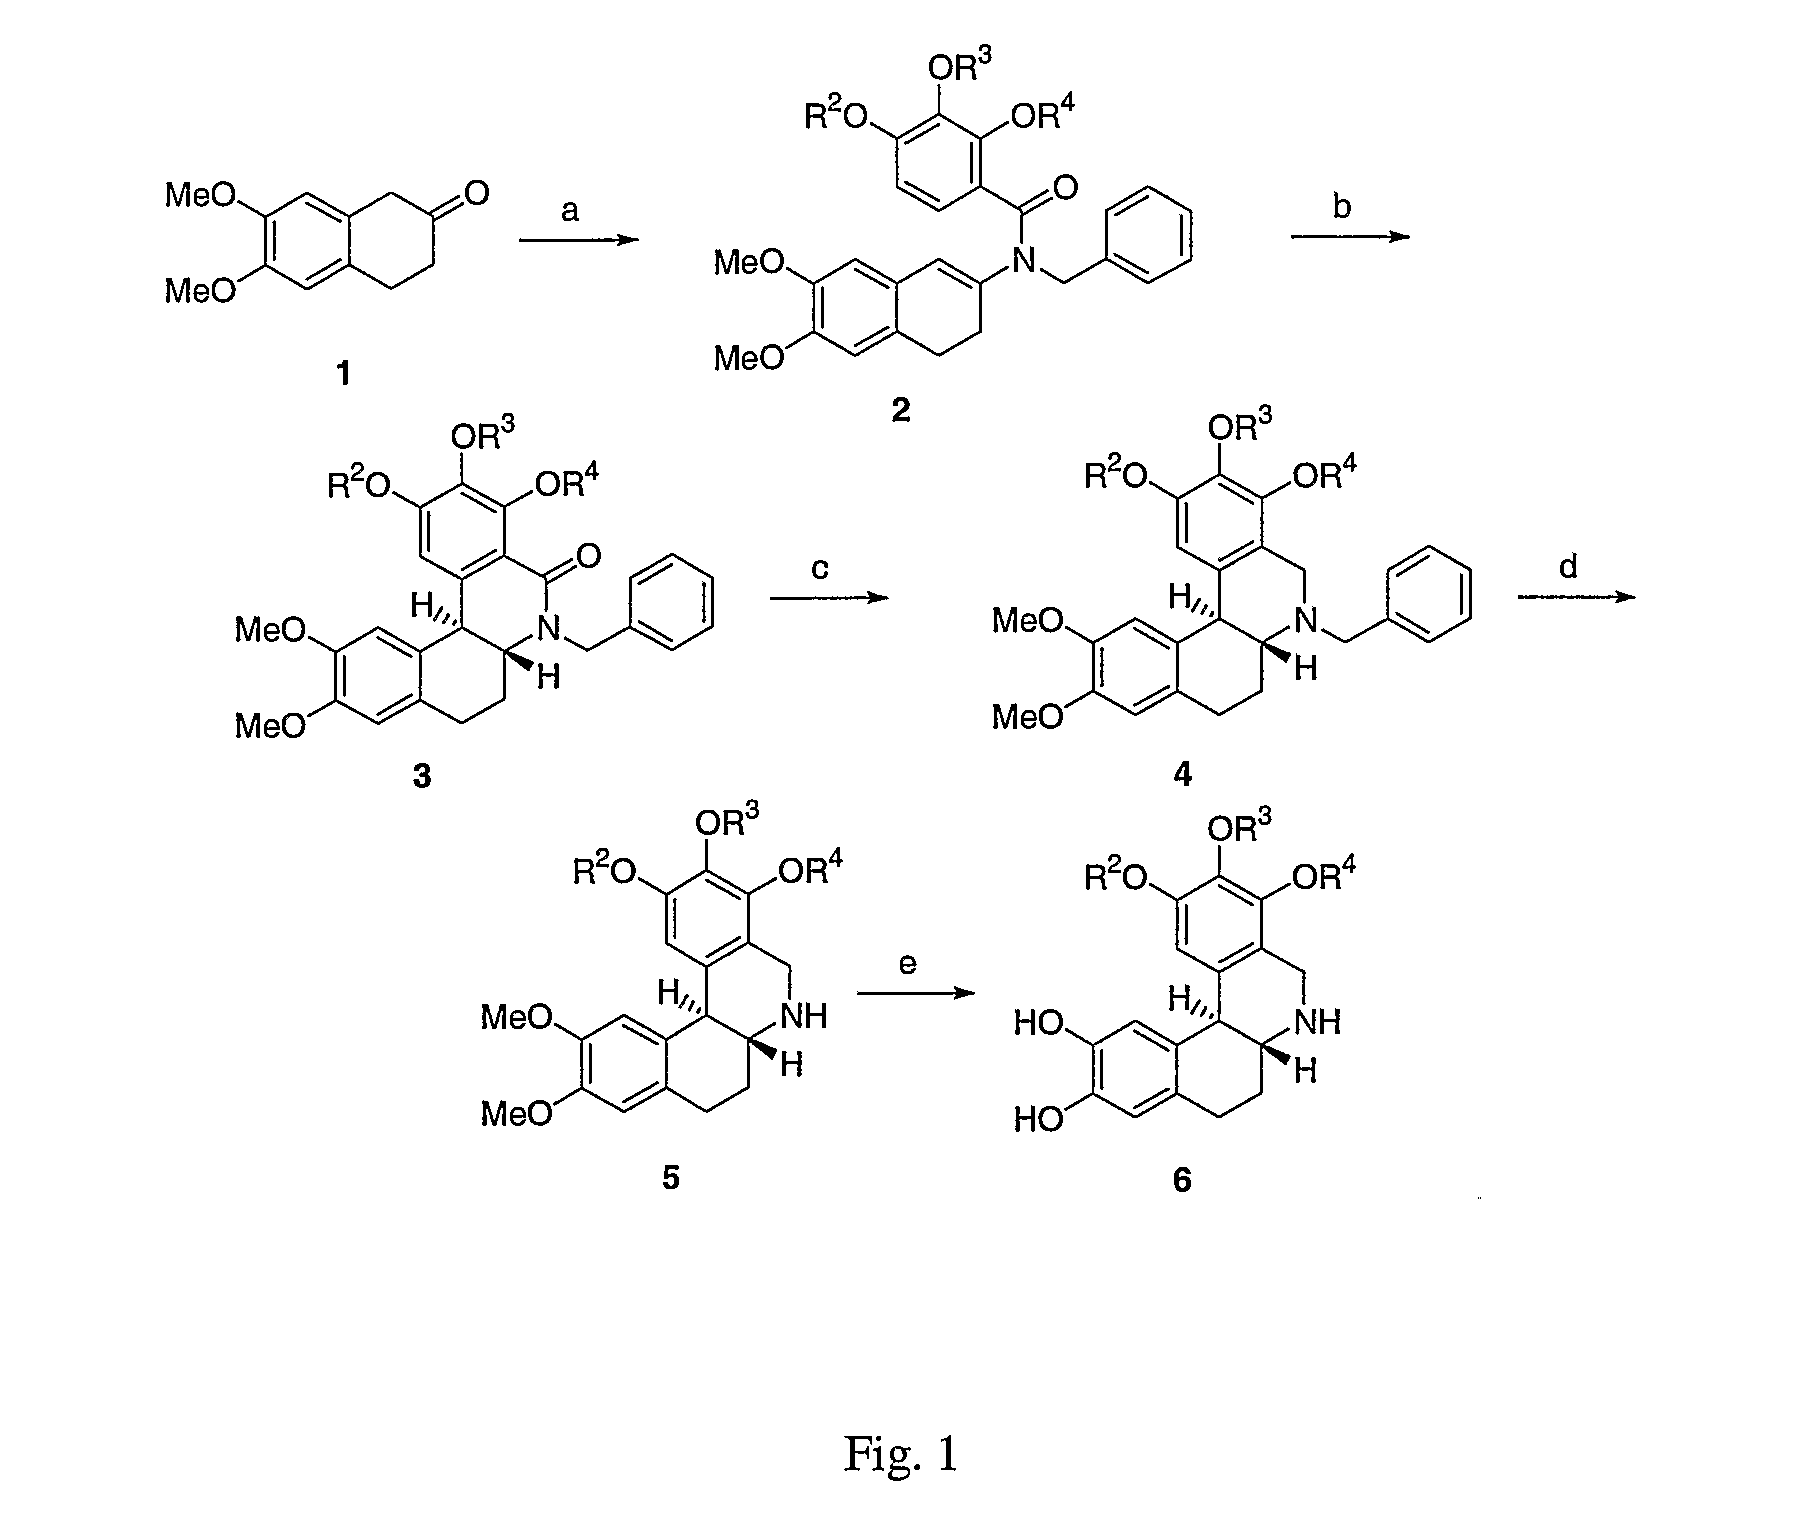 Co-administration of dopamine-receptor binding compounds